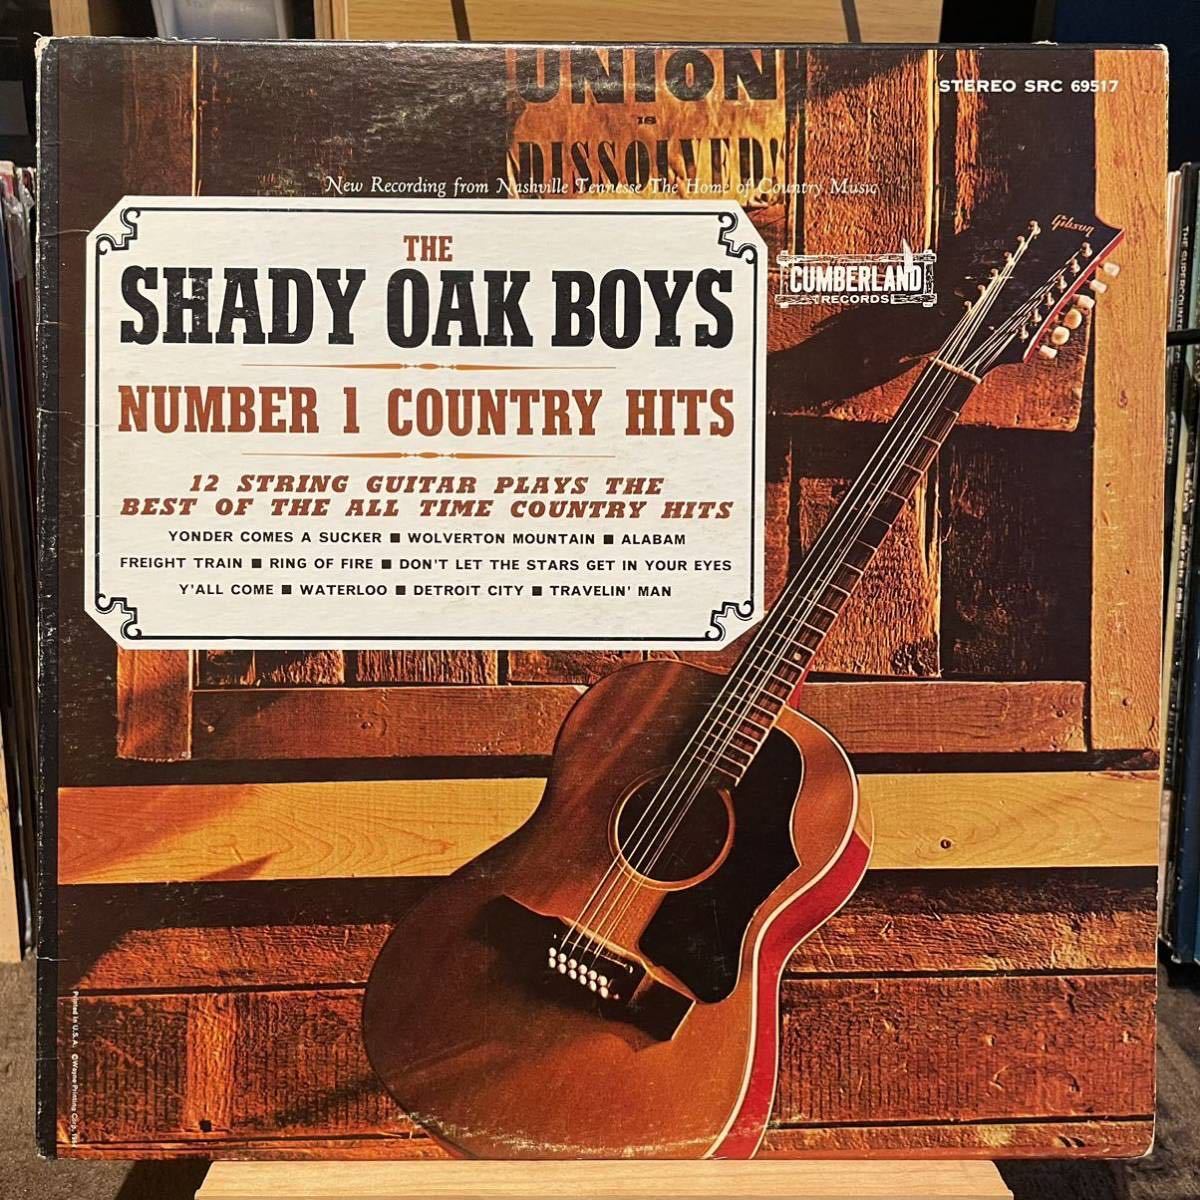 【US盤Org.深溝】The Shady Oak Boys Number 1 Country Hits Cumberland Records SRC-69517_画像1